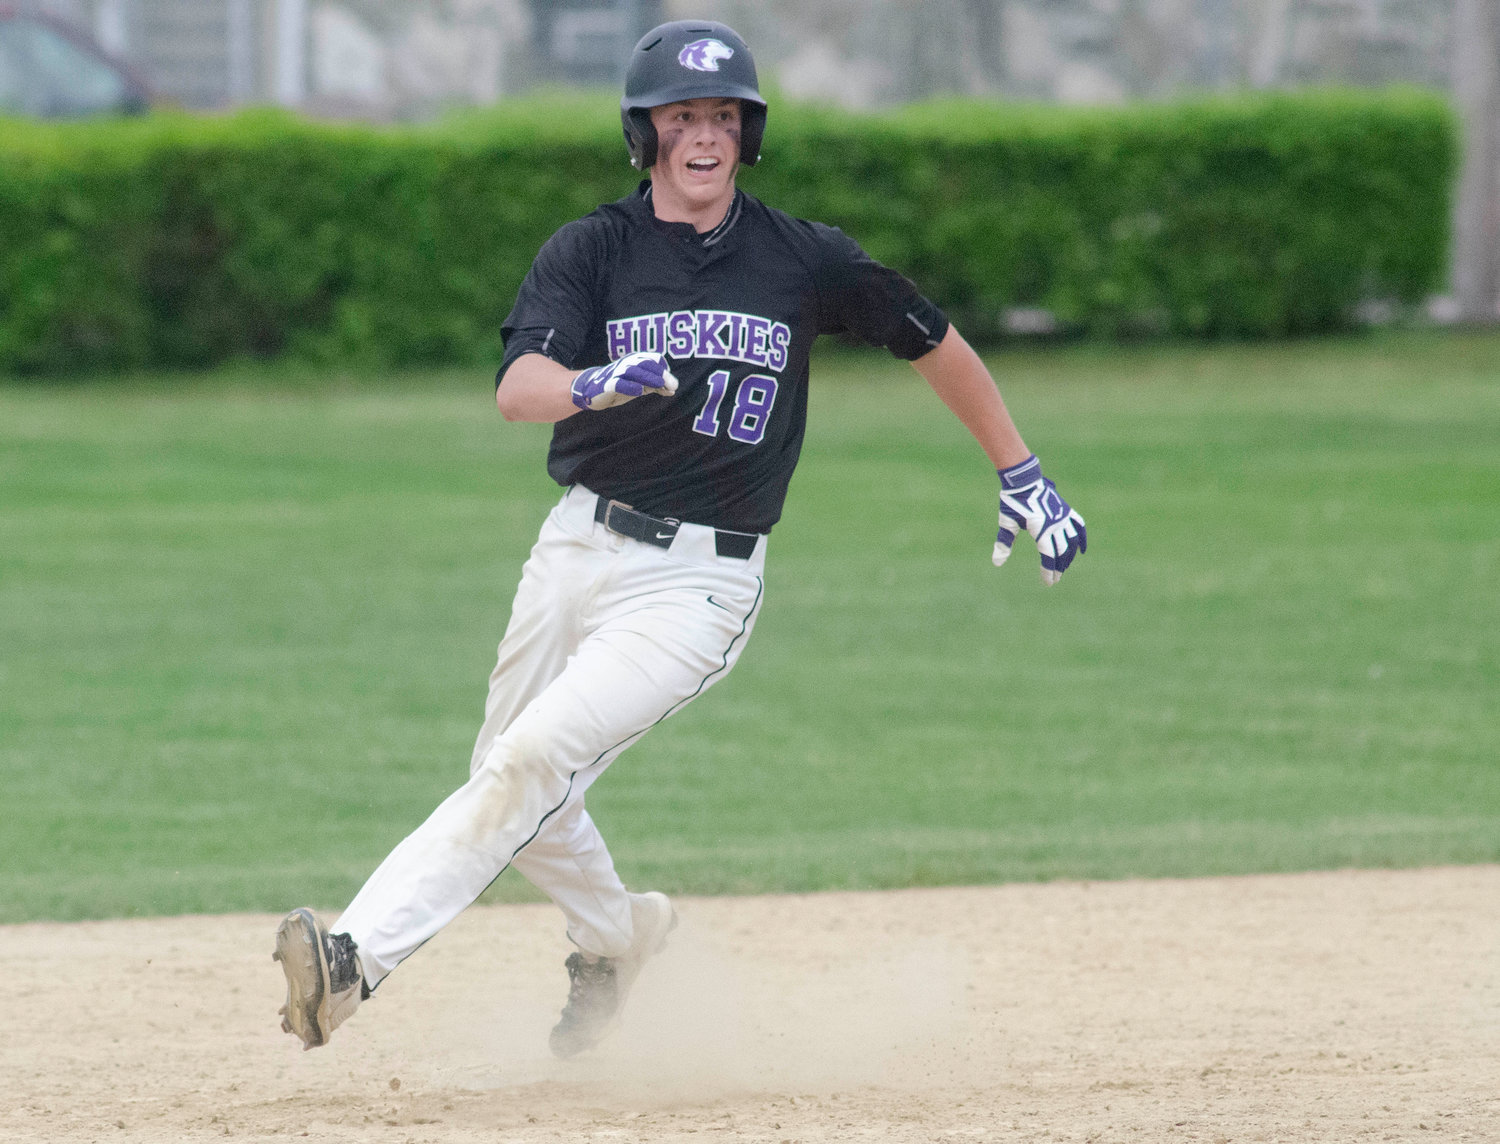 First baseman Matt Gale stayed hot against La Salle, smashing a double in the six inning to score AJ Jones to give Mt. Hope a 3-0 lead. In photo, Gale rounds second base in the team's win over East Providence.